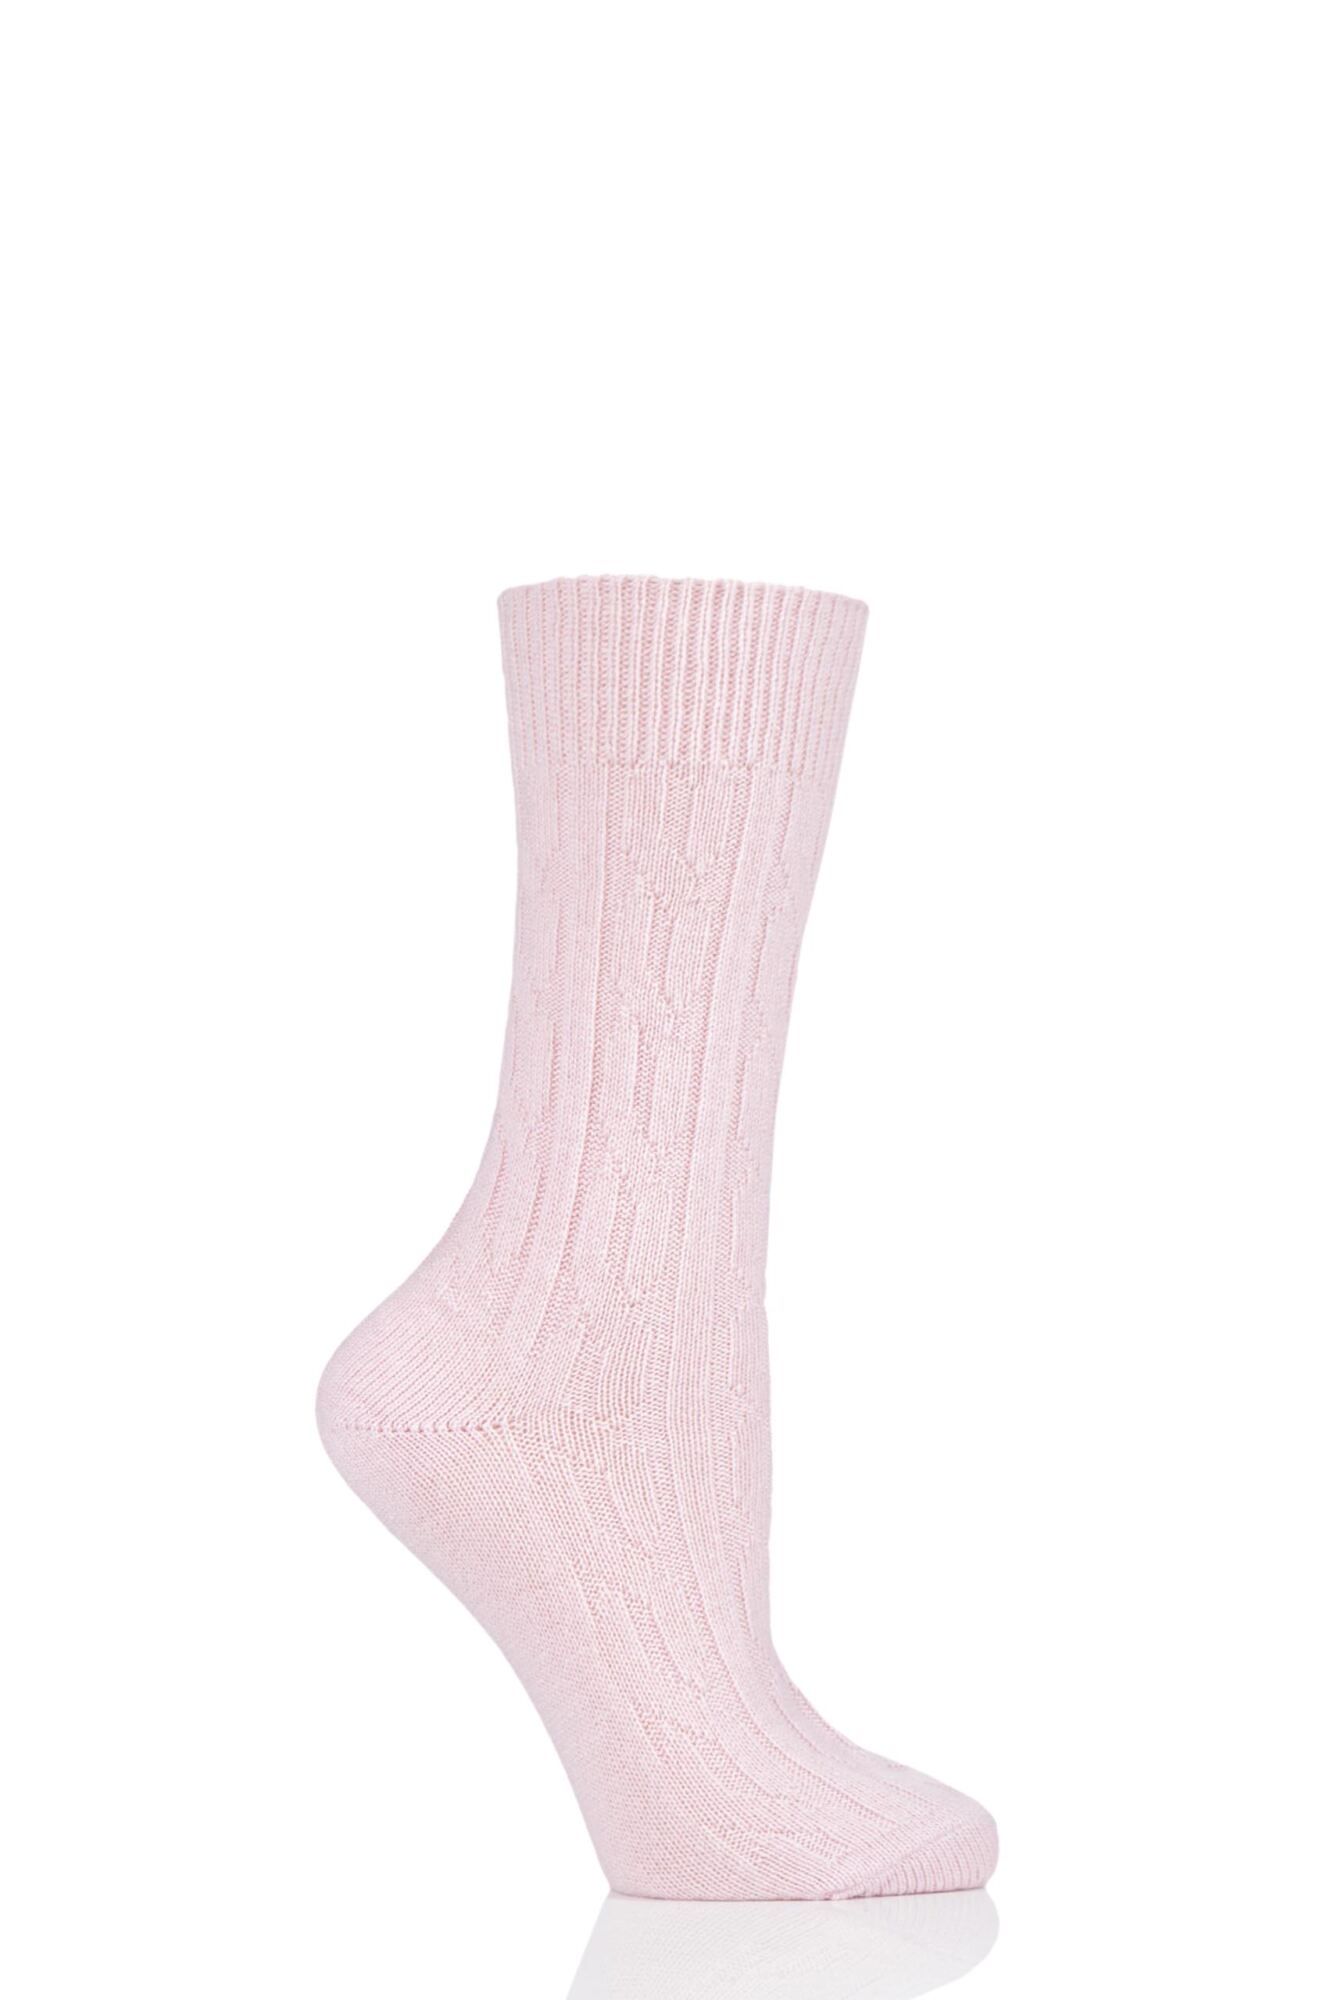 1 Pair of London 100% Cashmere Cable Knit Bed Socks Ladies - SOCKSHOP of London